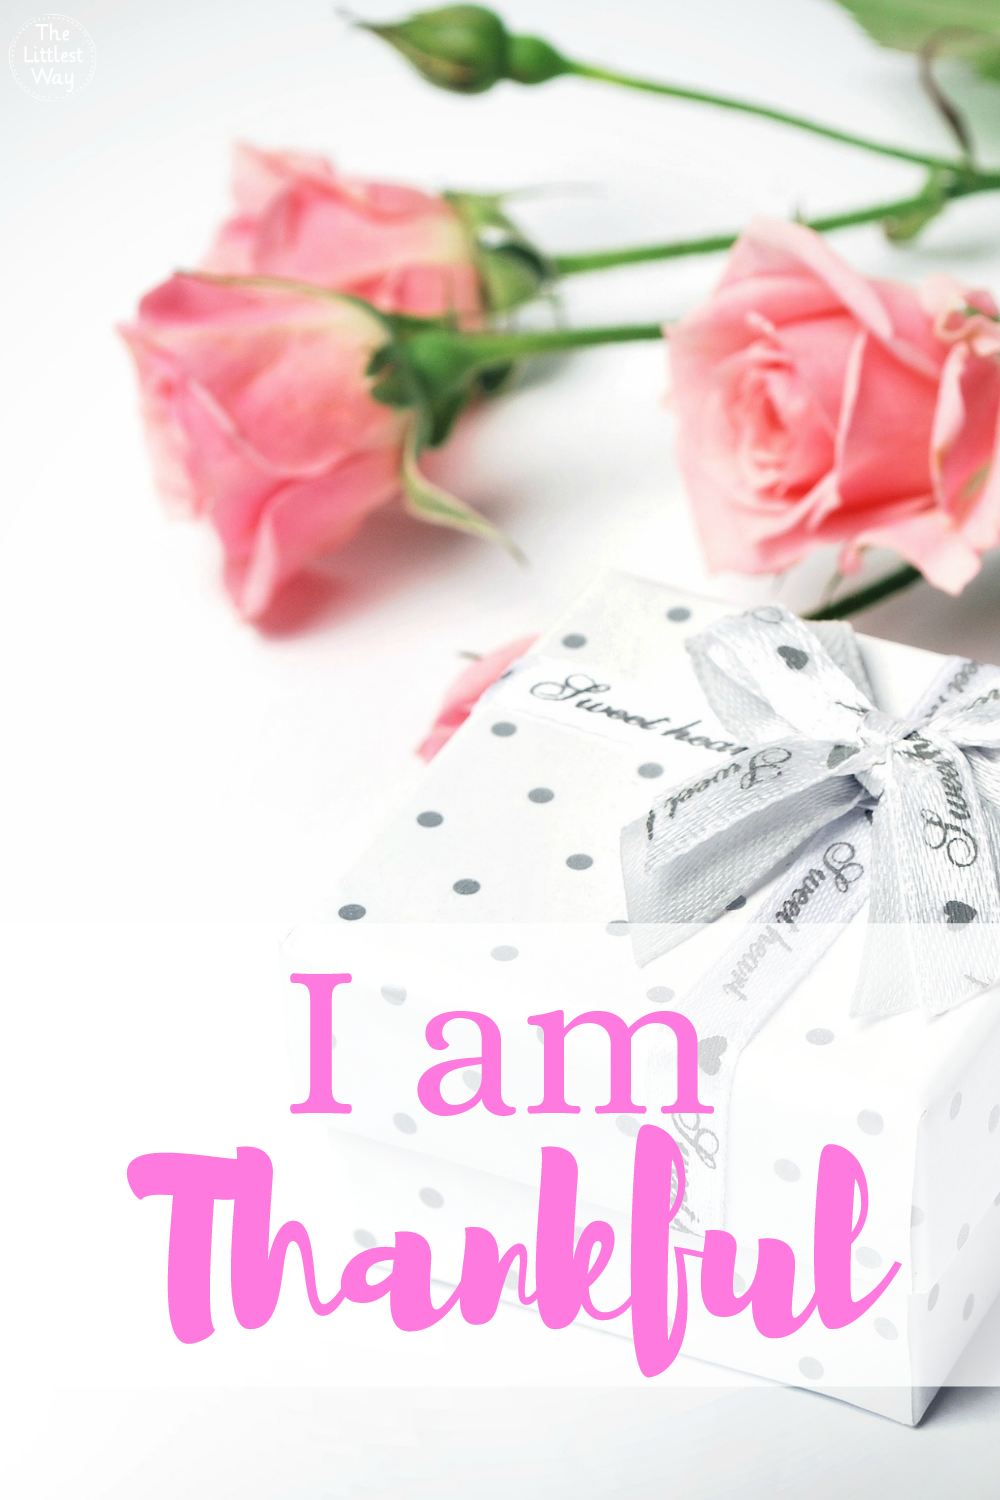 Daily Affirmations: I am thankful can be a life changing affirmation to change your thinking.